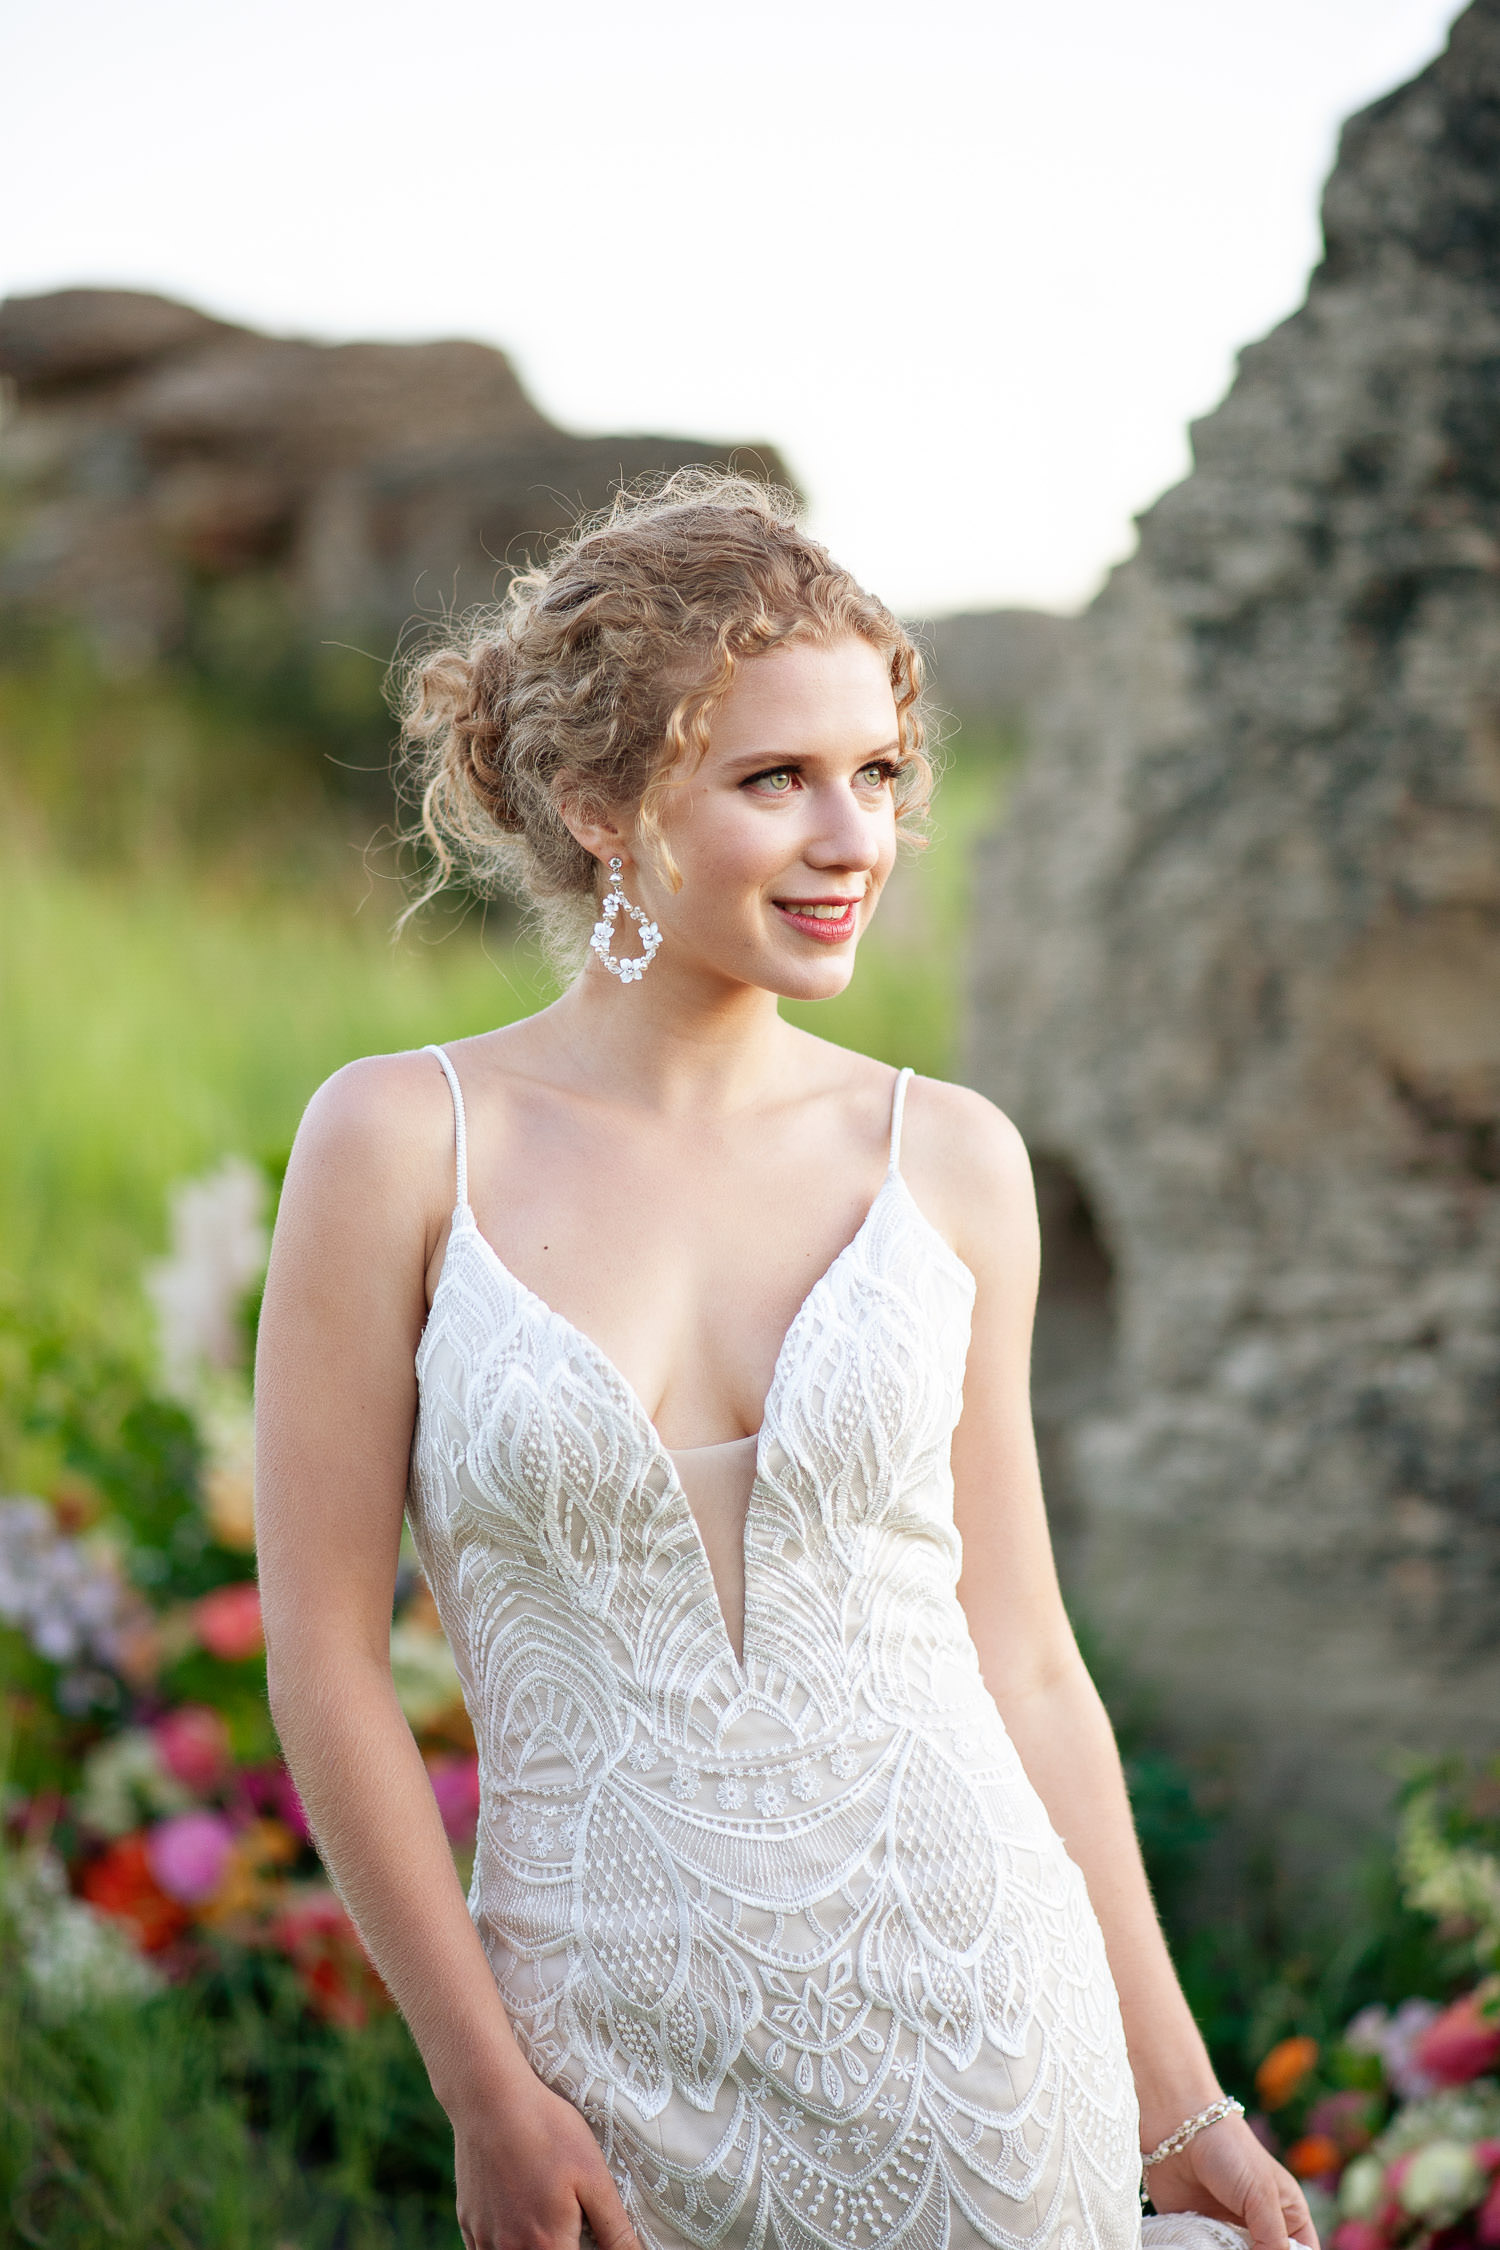 Alberta bride wearing a lace gown from Lis Simon captured by Tara Whittaker Photography